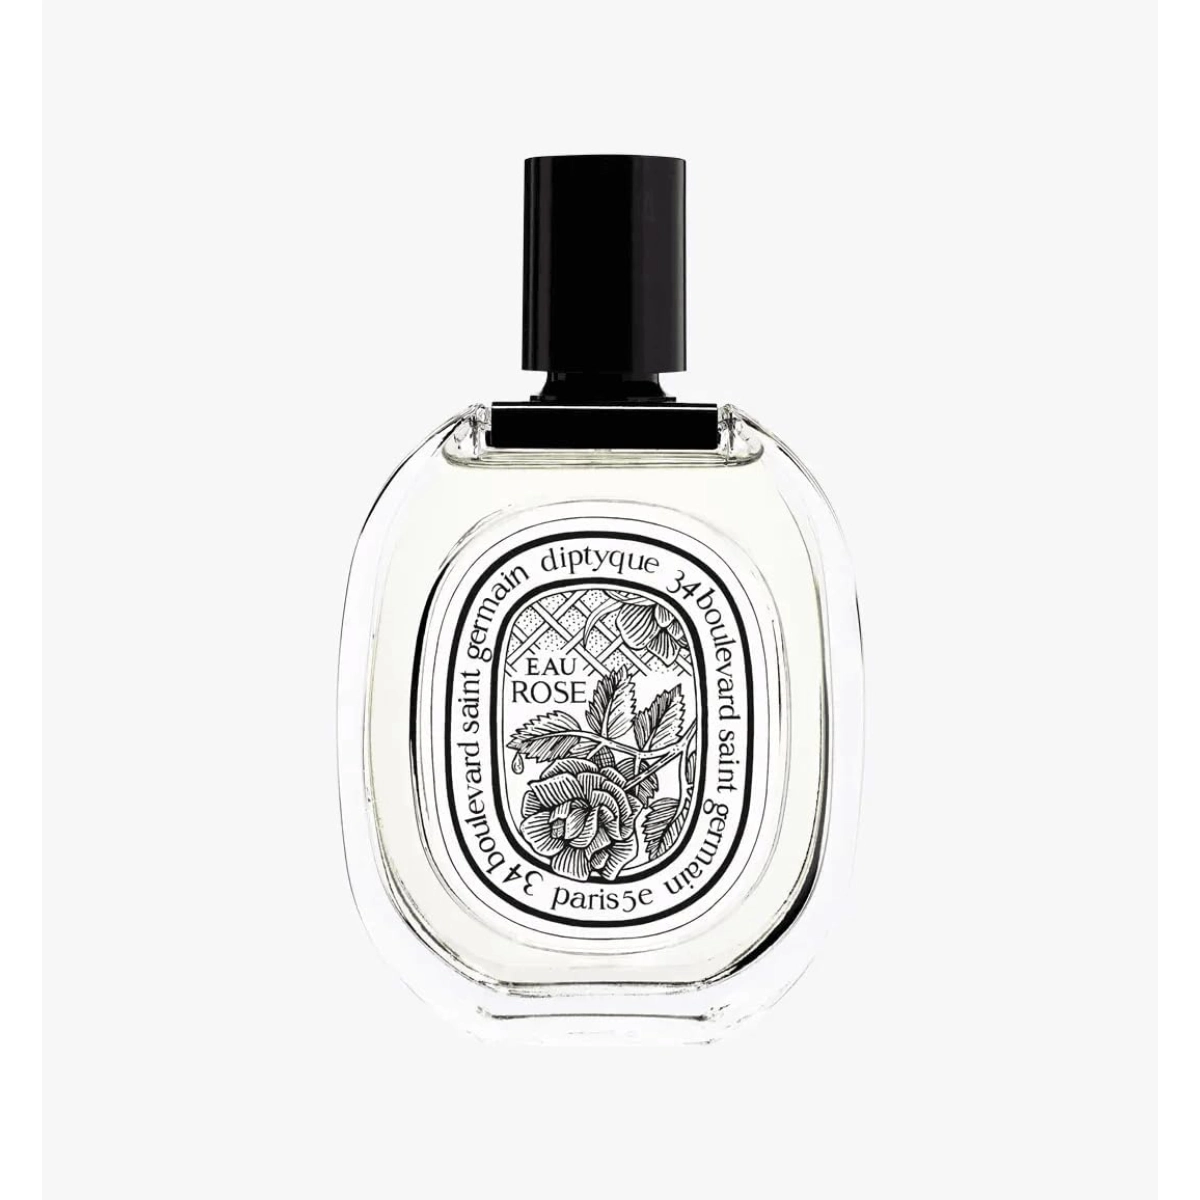 Diptyque Eau Rose perfume bottle on a clean white background